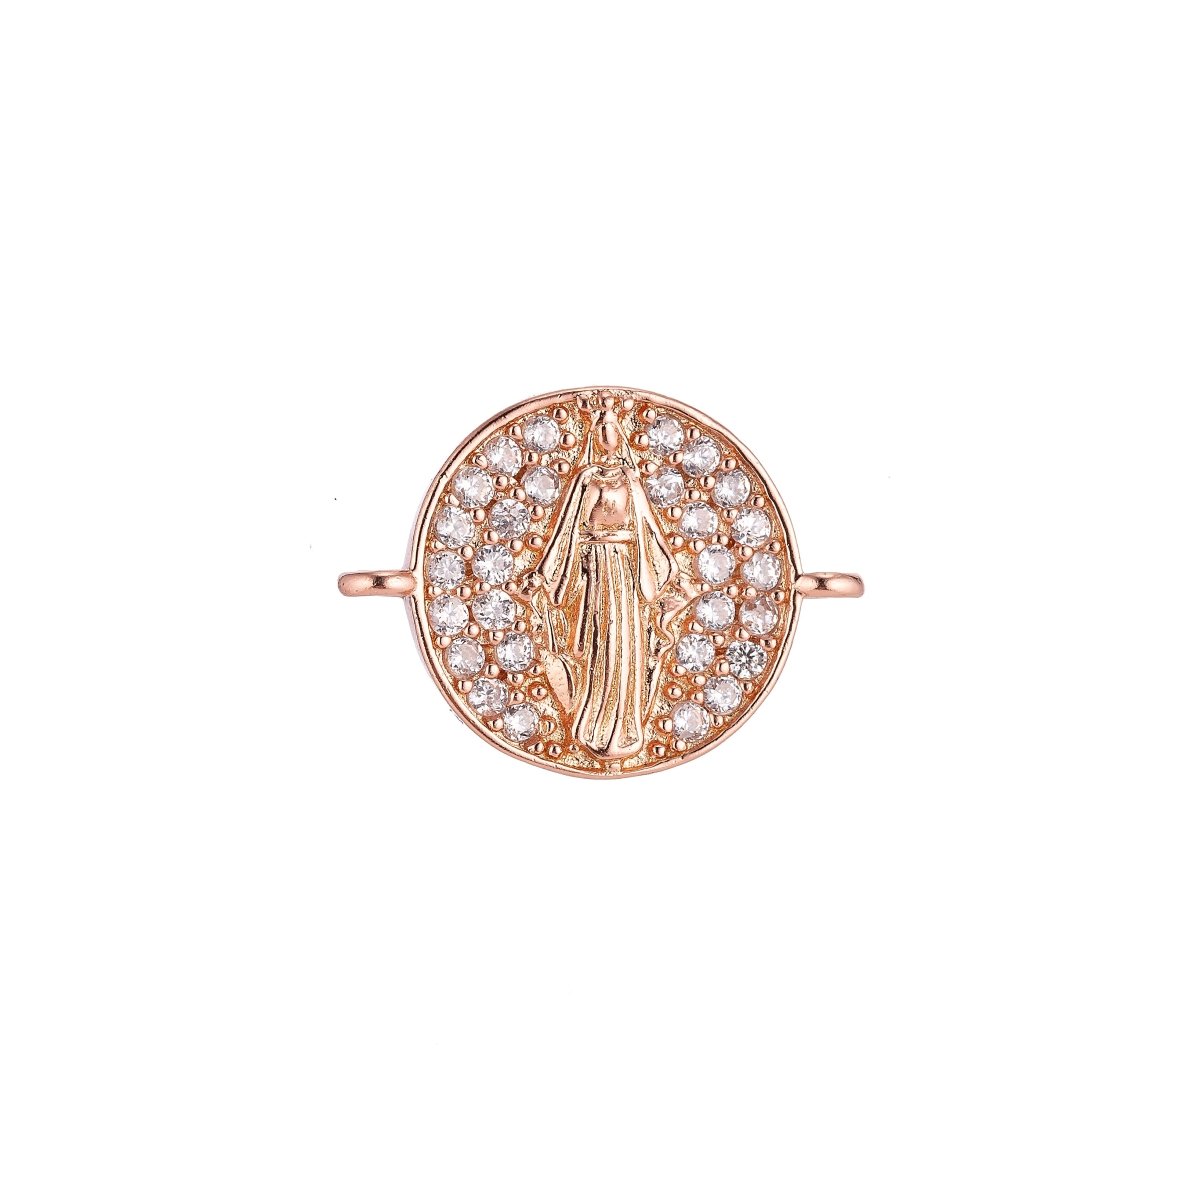 On Sale! CLEARANCE! 18K Gold Filled, Silver, Black Jesus Mother Mary Catholic Medallion, Cubic Zirconia Bracelet Charm, Micro Pave Connector For Necklace Bracelet Jewelry Making | F-077 - DLUXCA